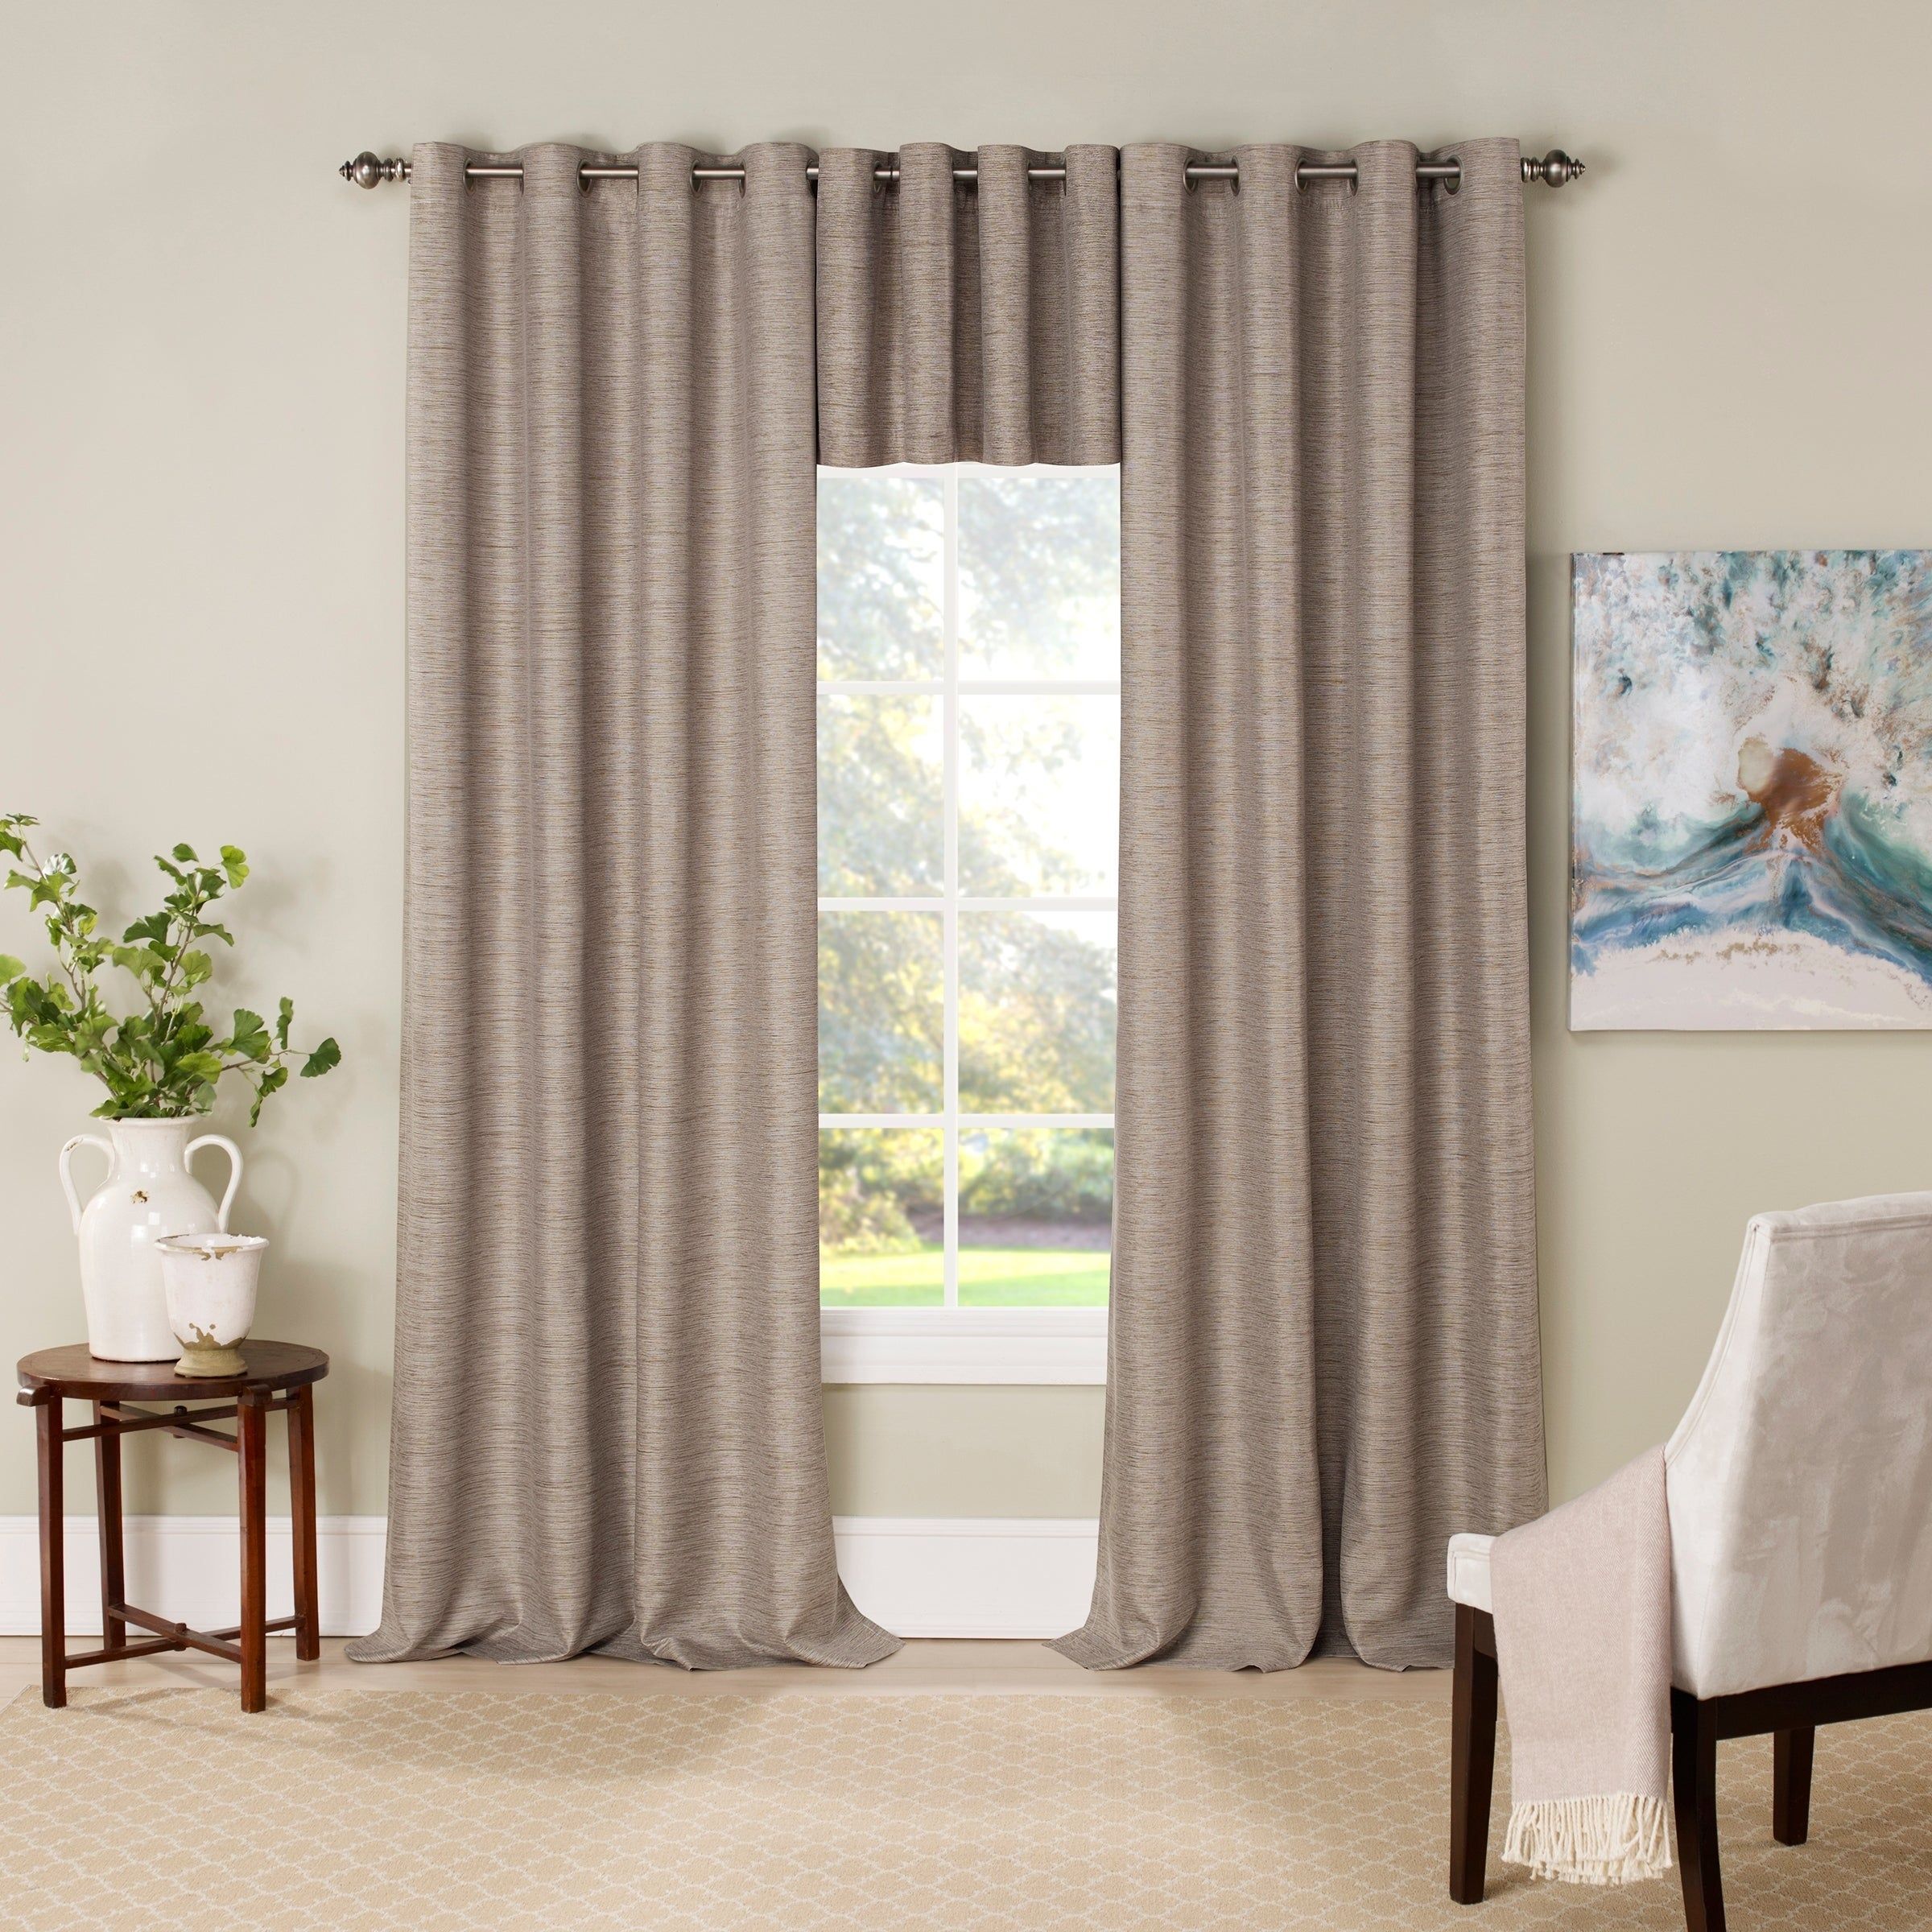 Eclipse Newport Blackout Curtain Panel – 52x95 With Eclipse Newport Blackout Curtain Panels (View 1 of 20)